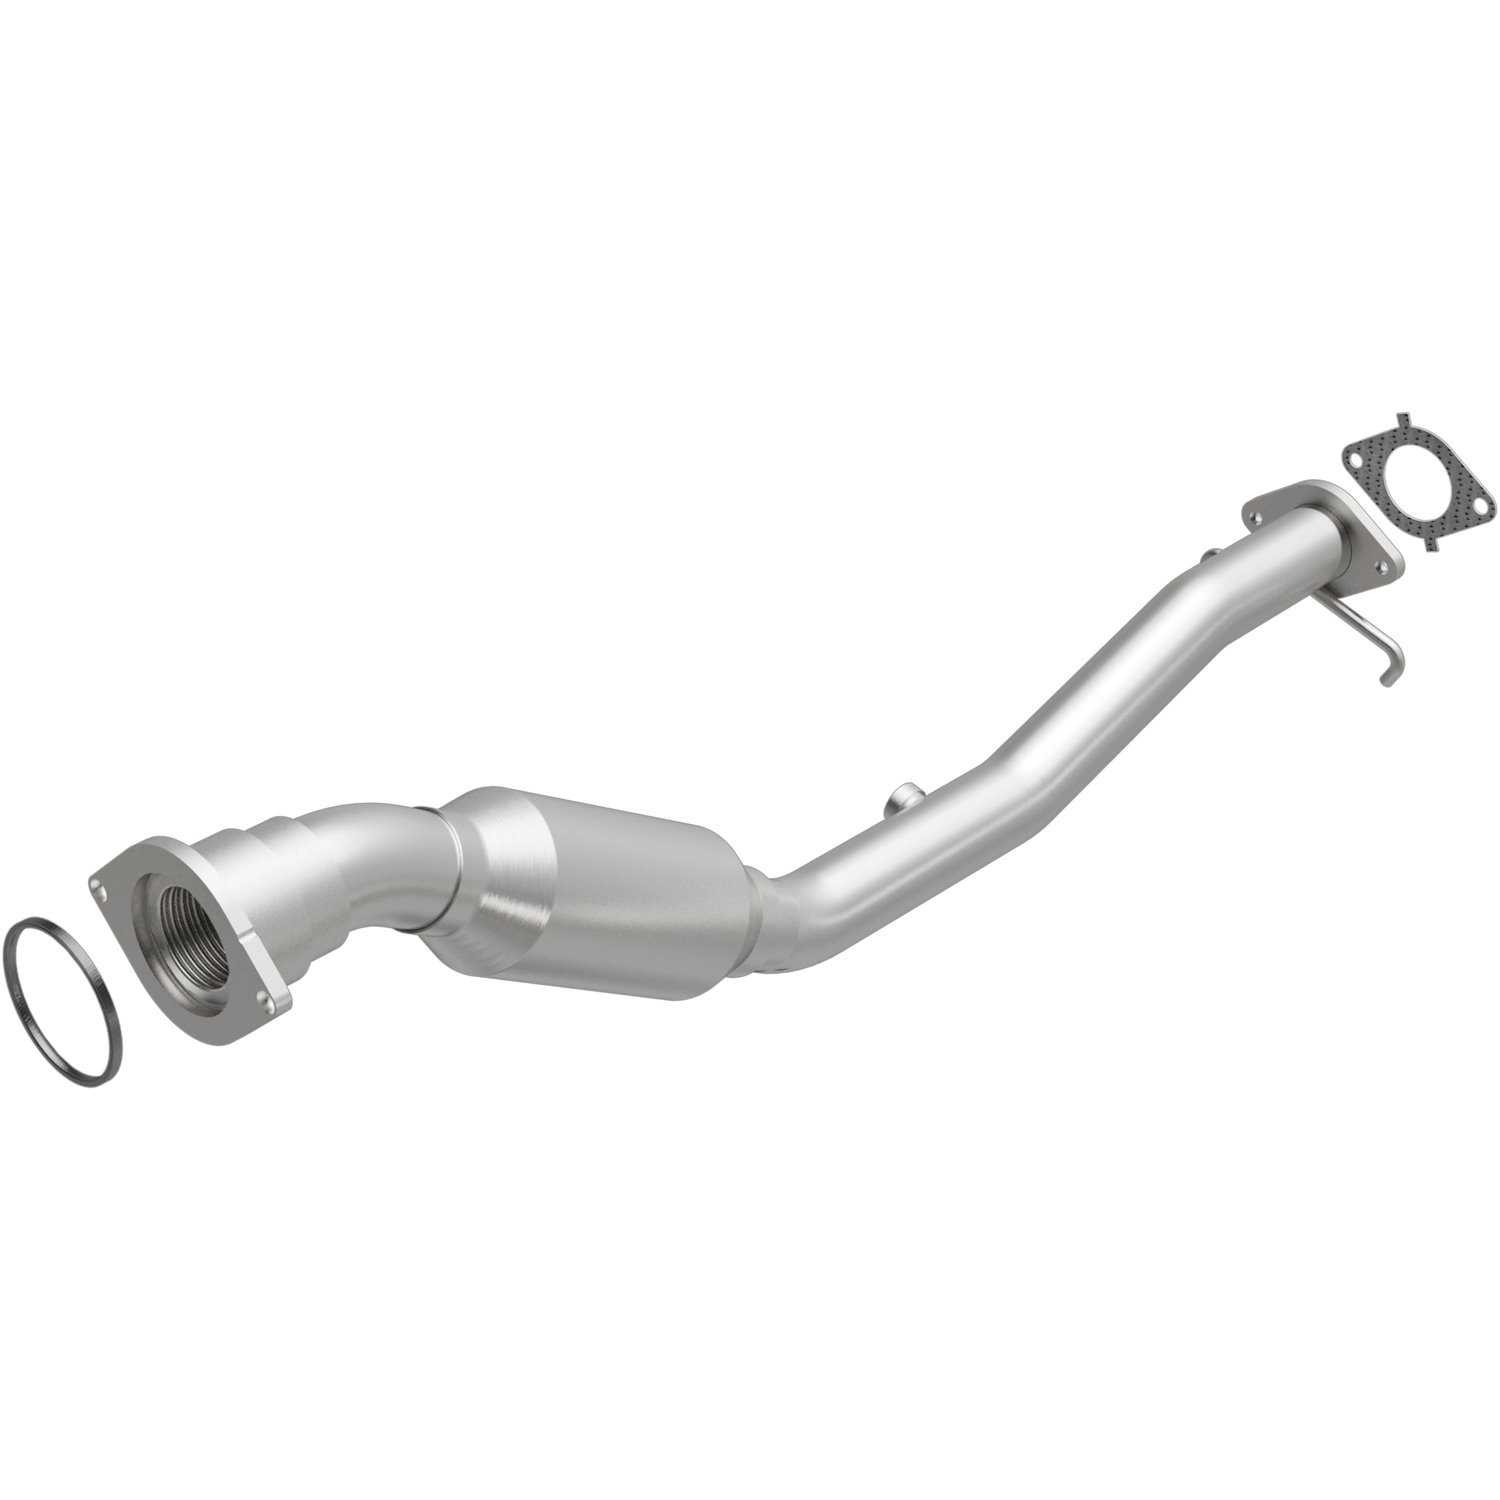 OEM Grade Federal / EPA Compliant Direct-Fit Catalytic Converter 49227